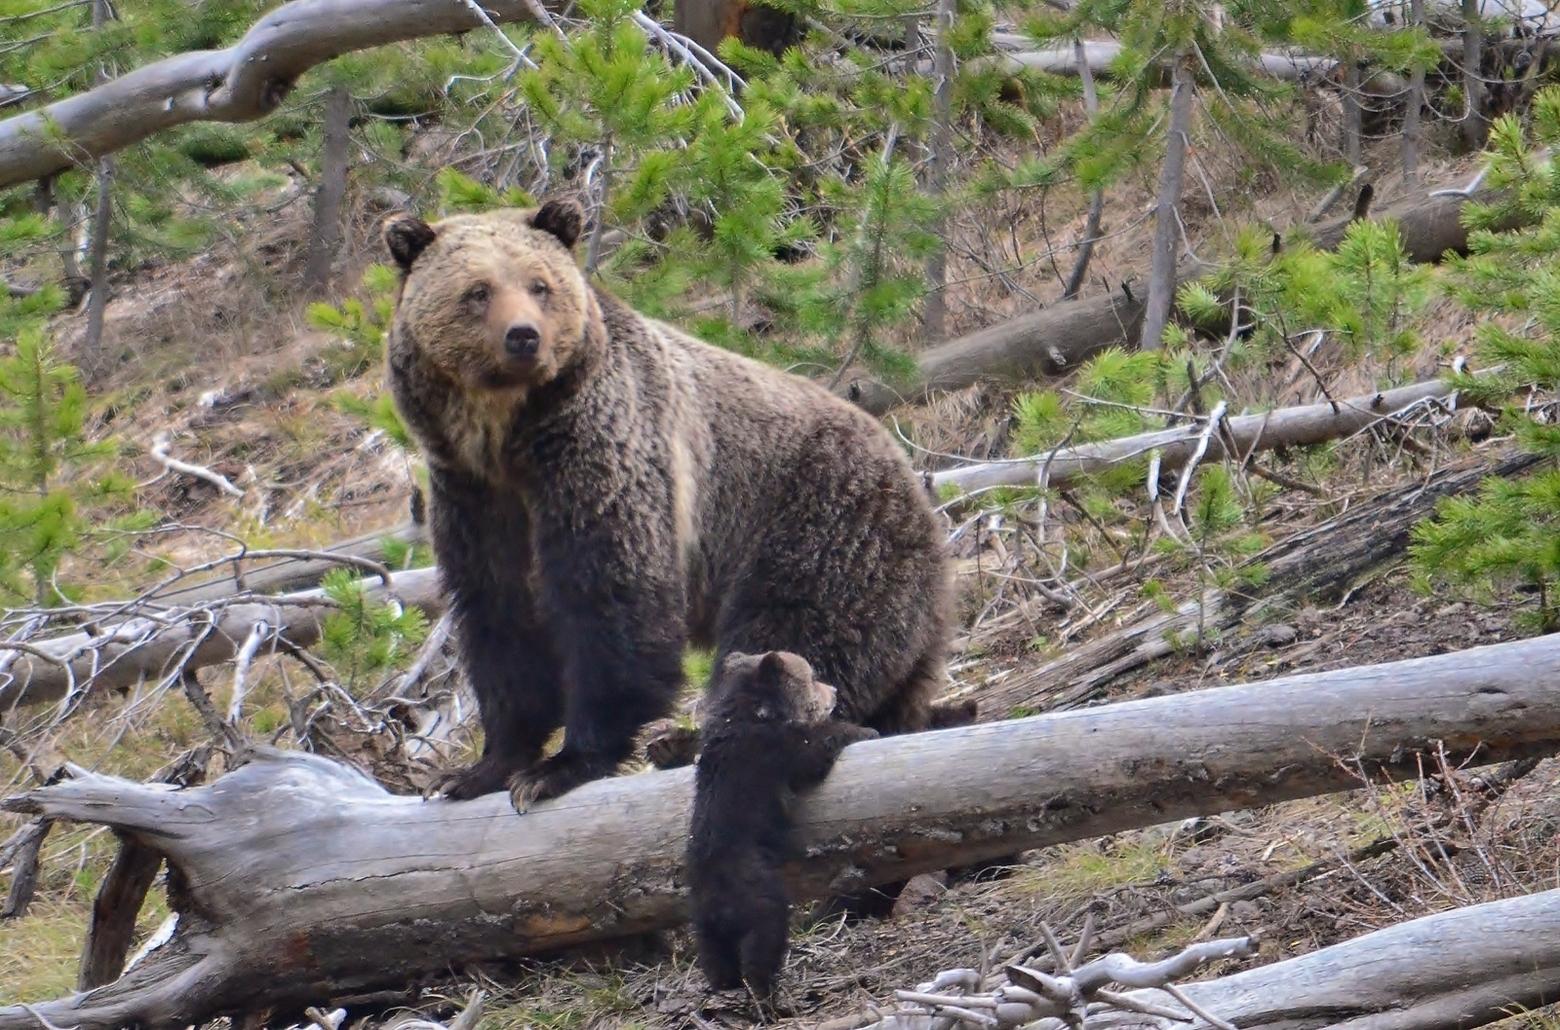 Grizzly mother with cub. Photo courtesy US Fish and Wildlife Service/Fran van Manen/USGS